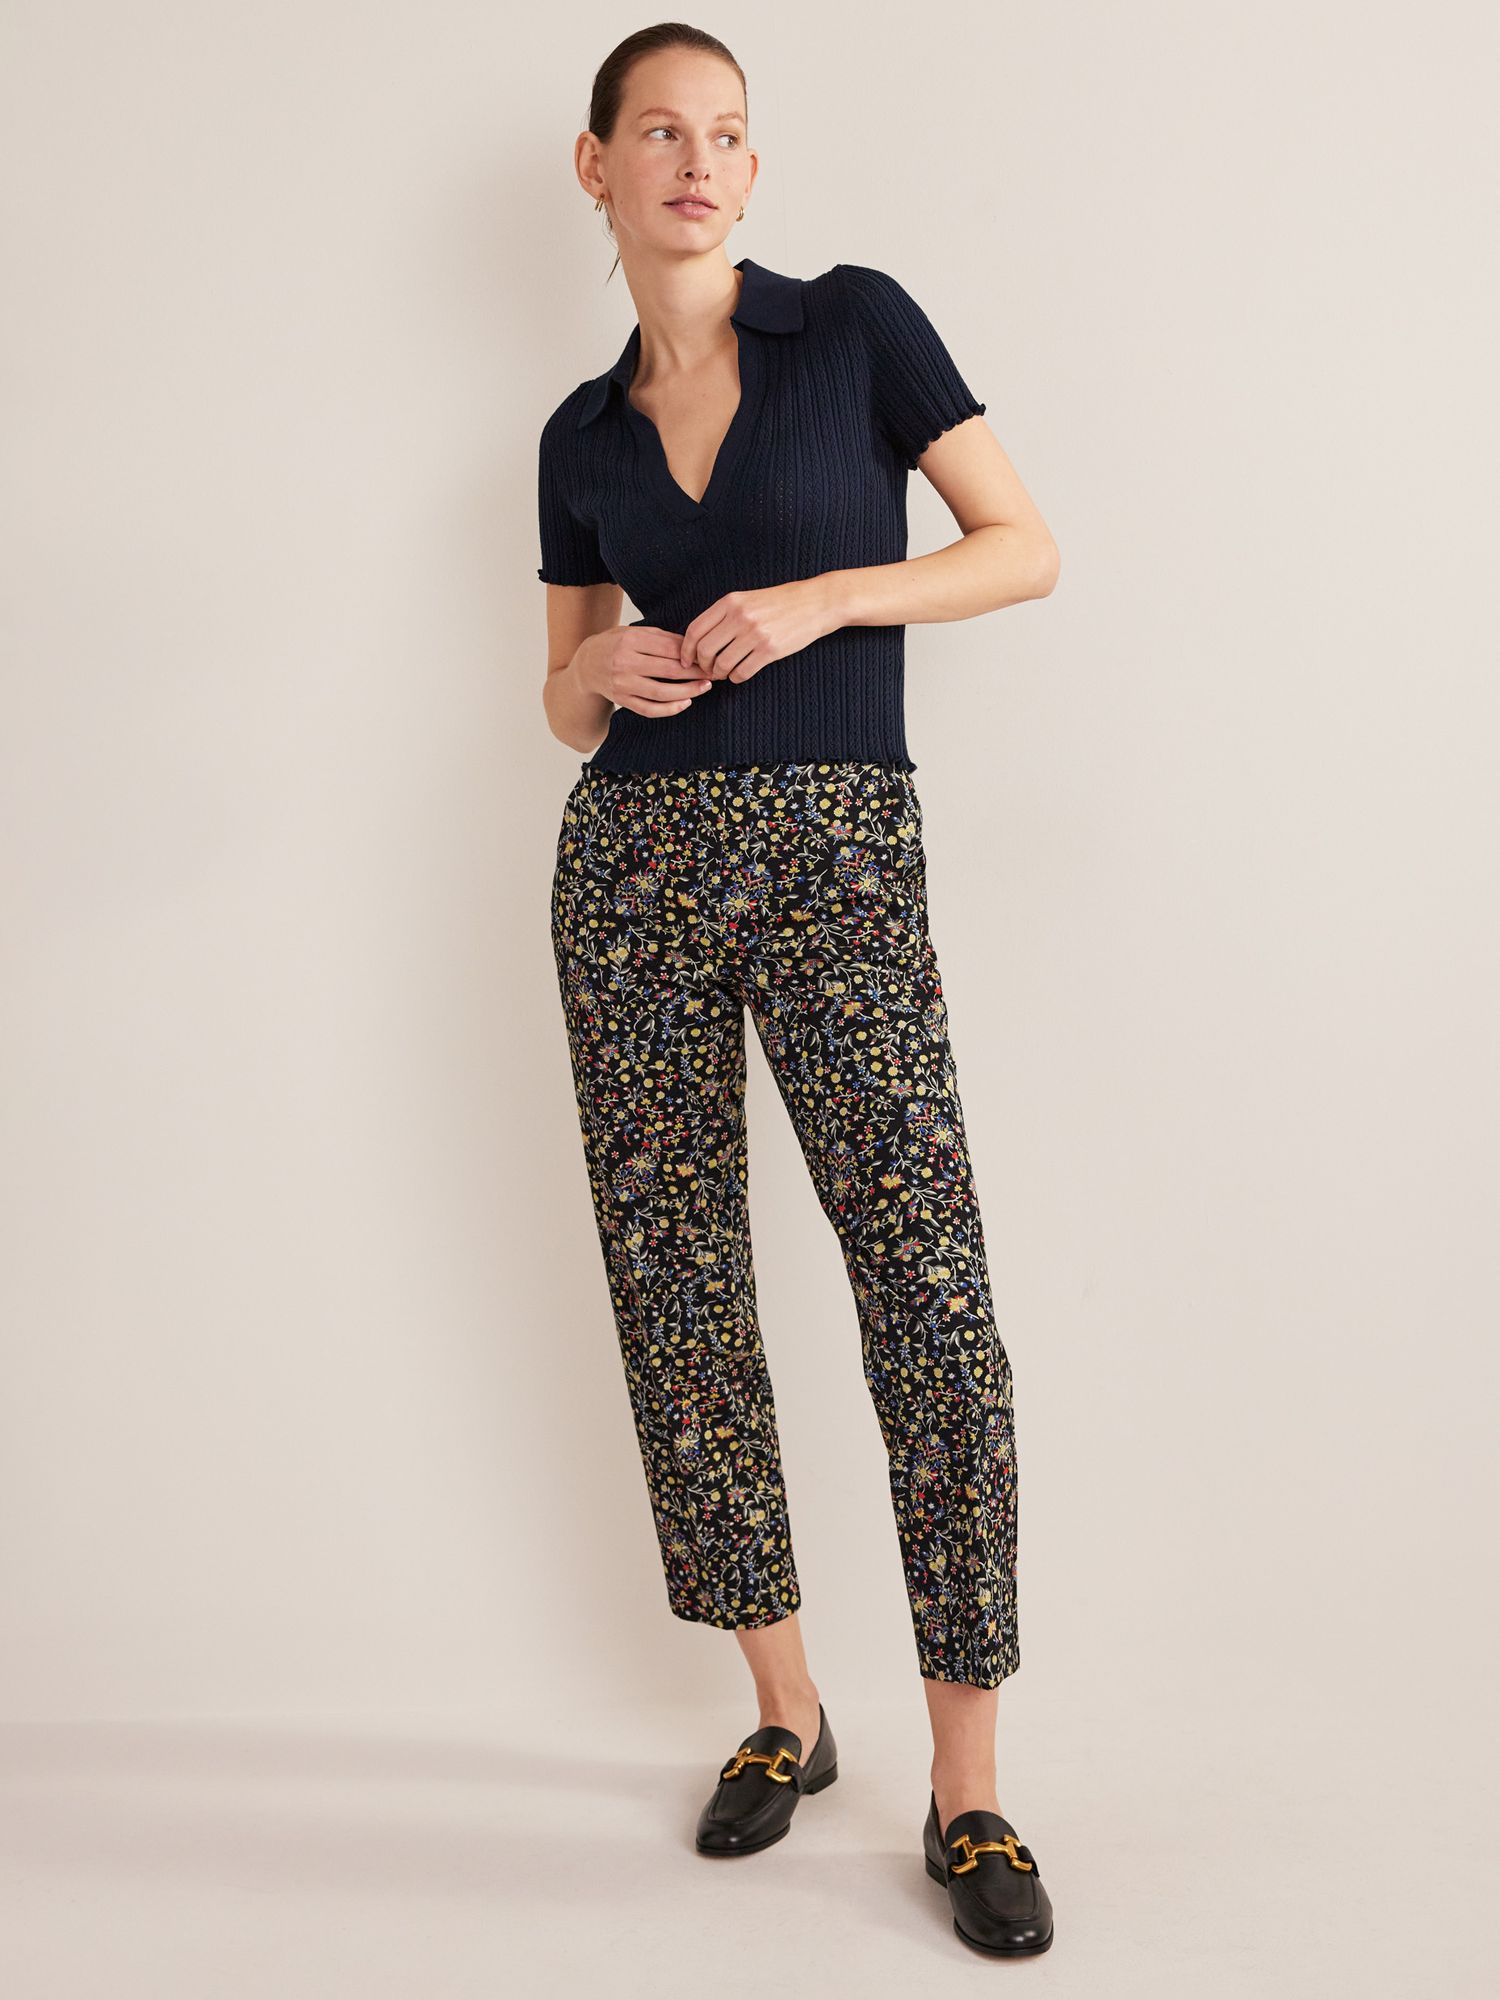 Buy Black Tapered Leg Trousers With Stretch - 8R, Trousers